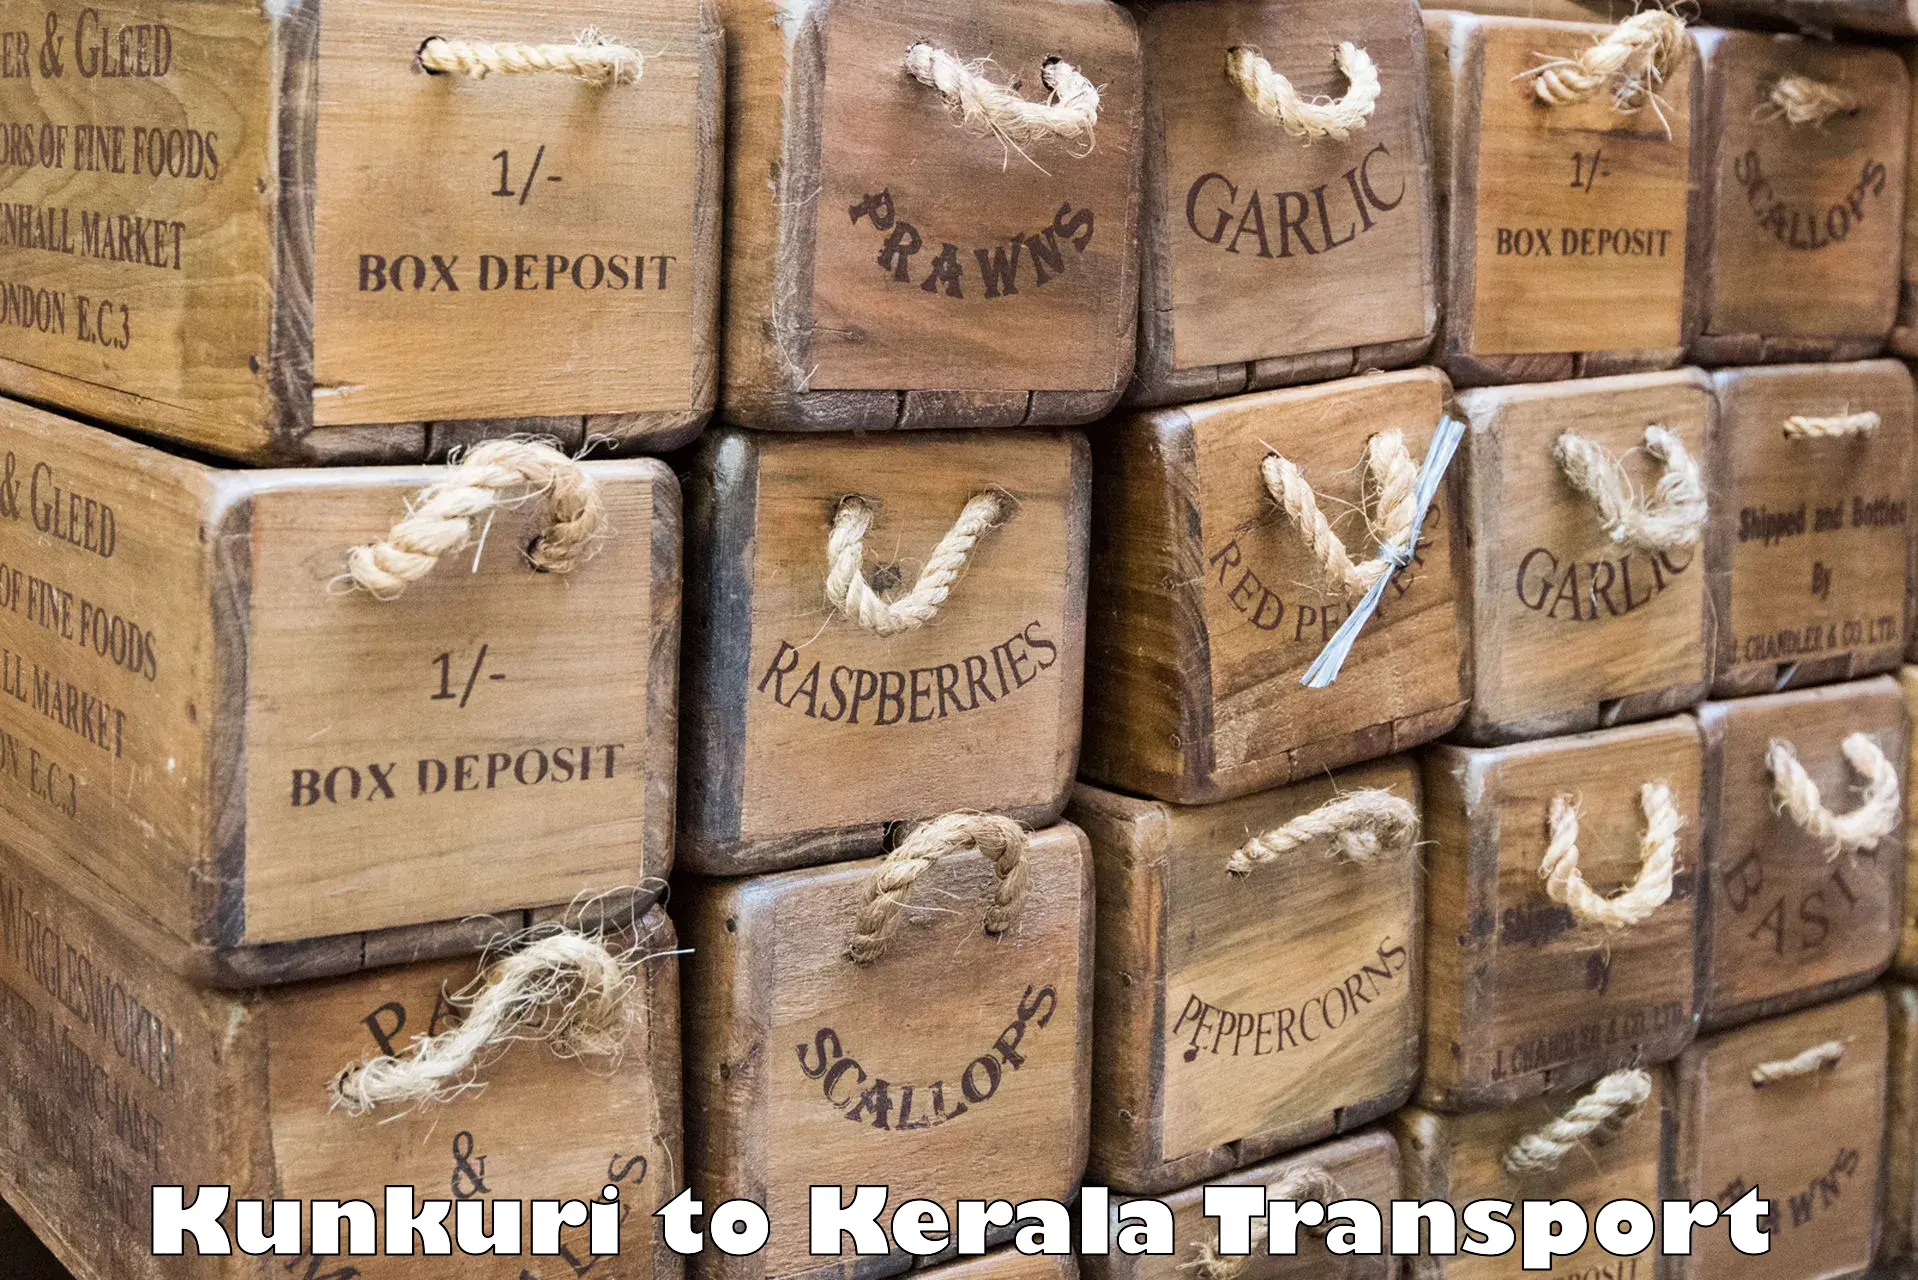 Container transportation services Kunkuri to Cochin University of Science and Technology